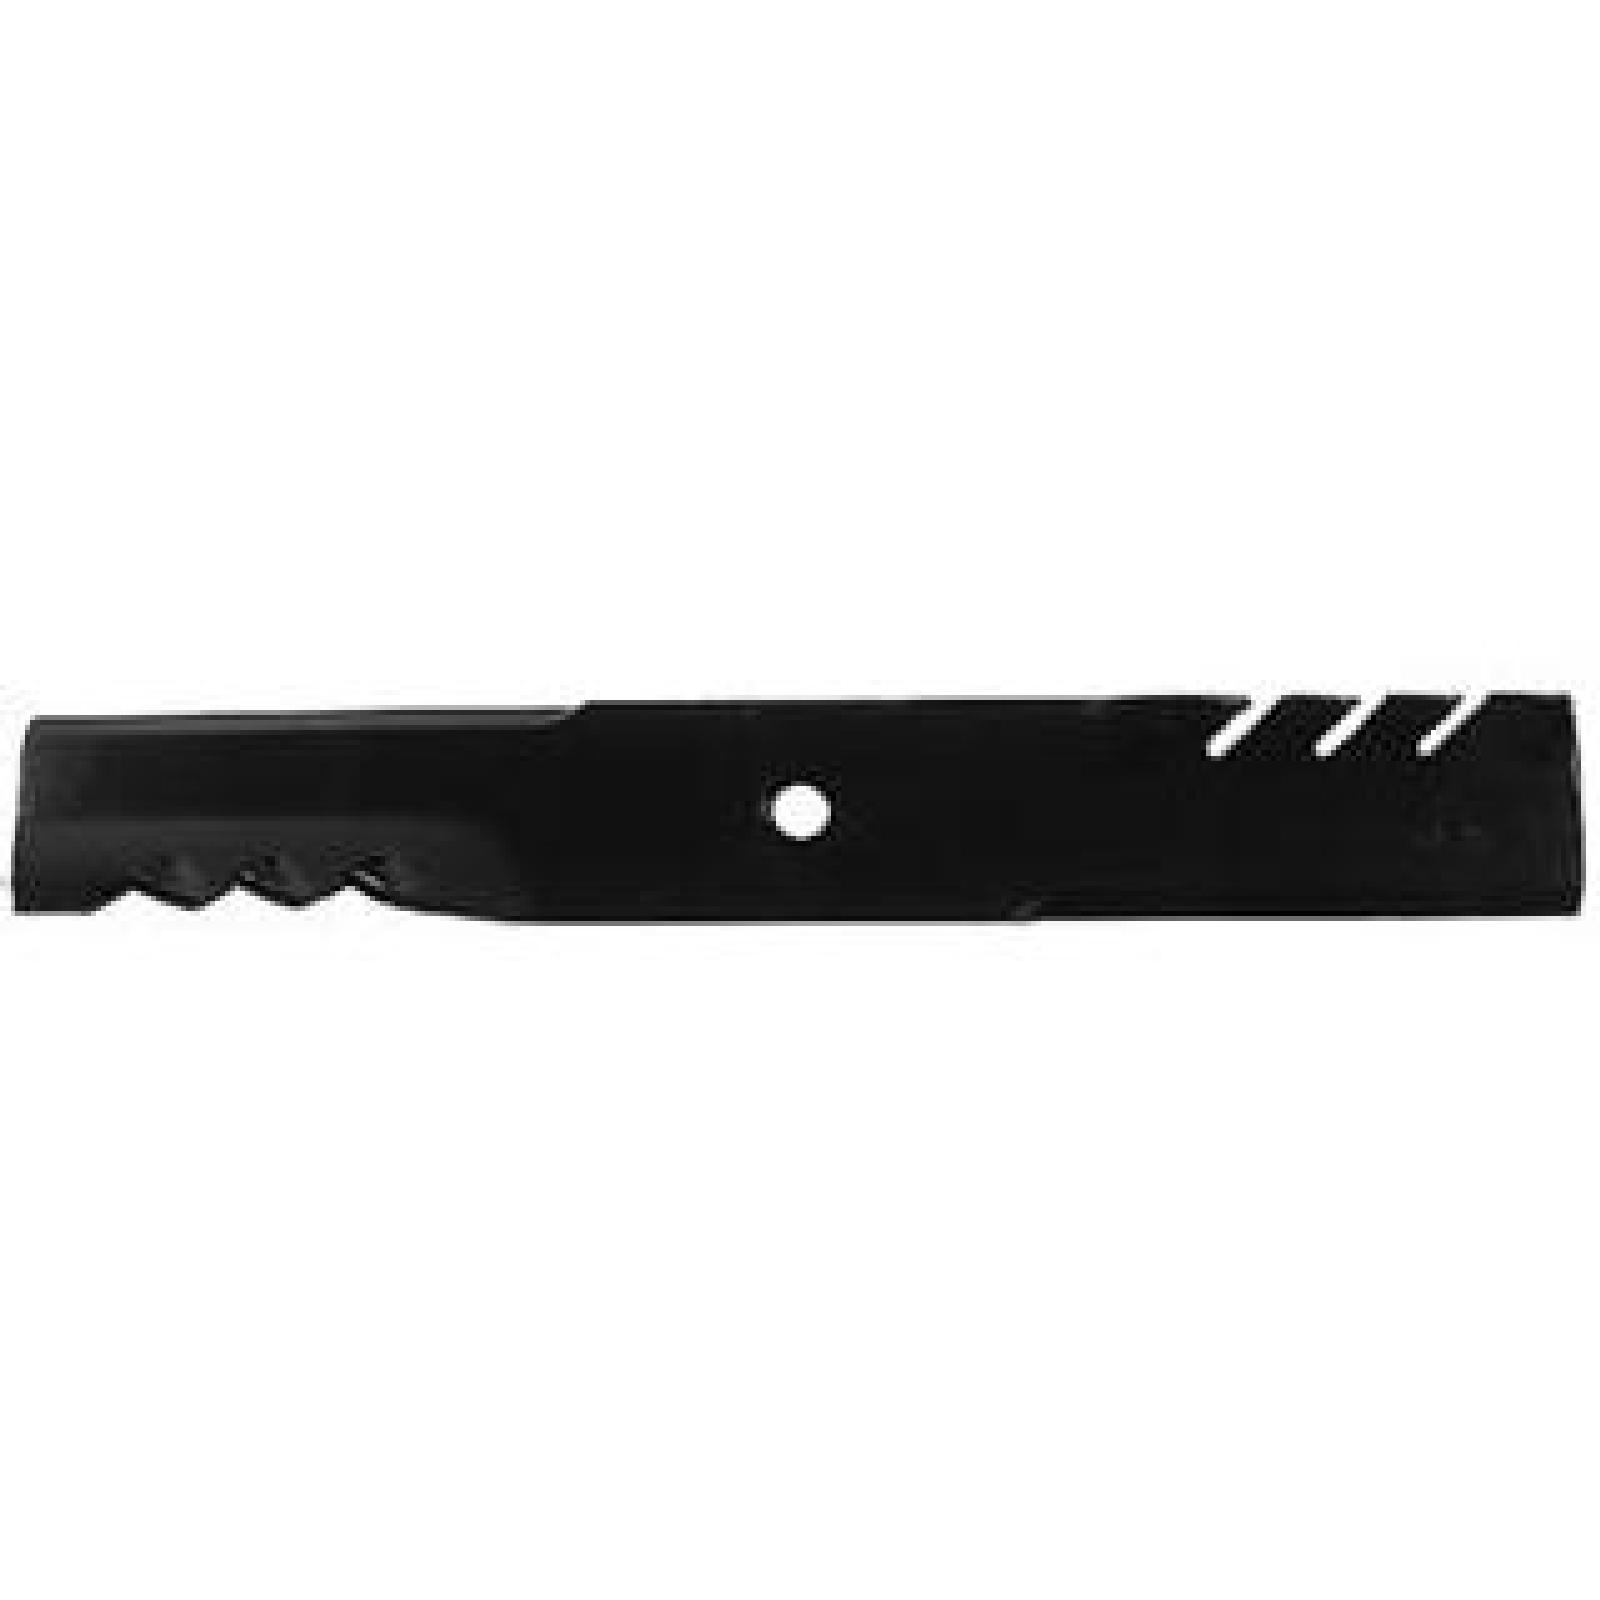 BLADE, GRAVELY, GATOR G6 part# 396-806 by Oregon - Click Image to Close